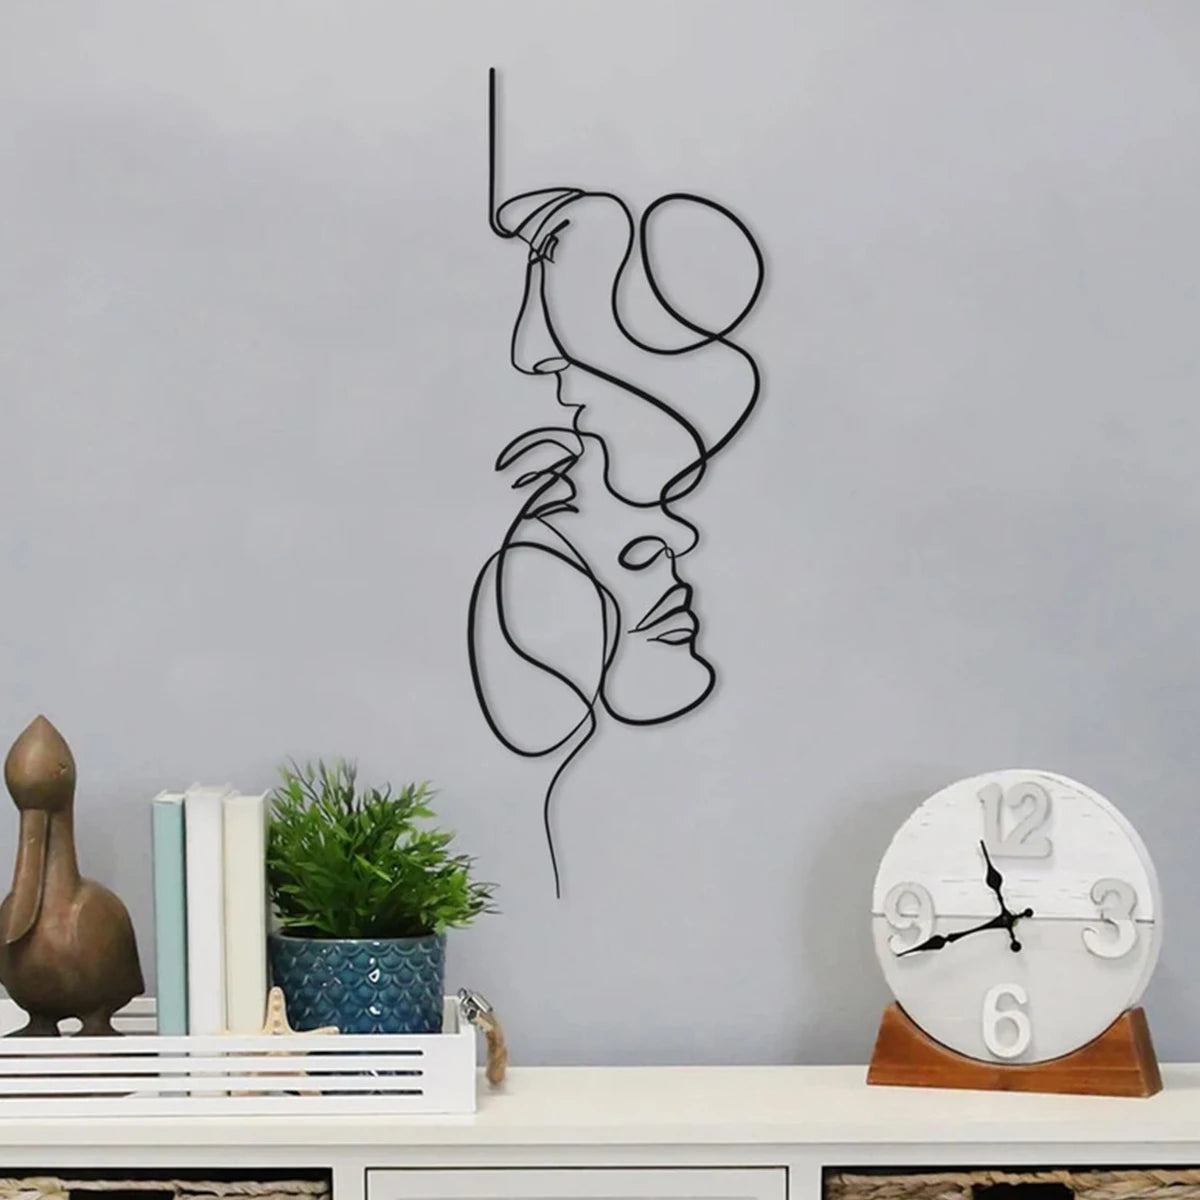 Metal wall art minimalist face lines wall hanging decoration abstract iron wall sculpture nordic style home décor crafts bedroom